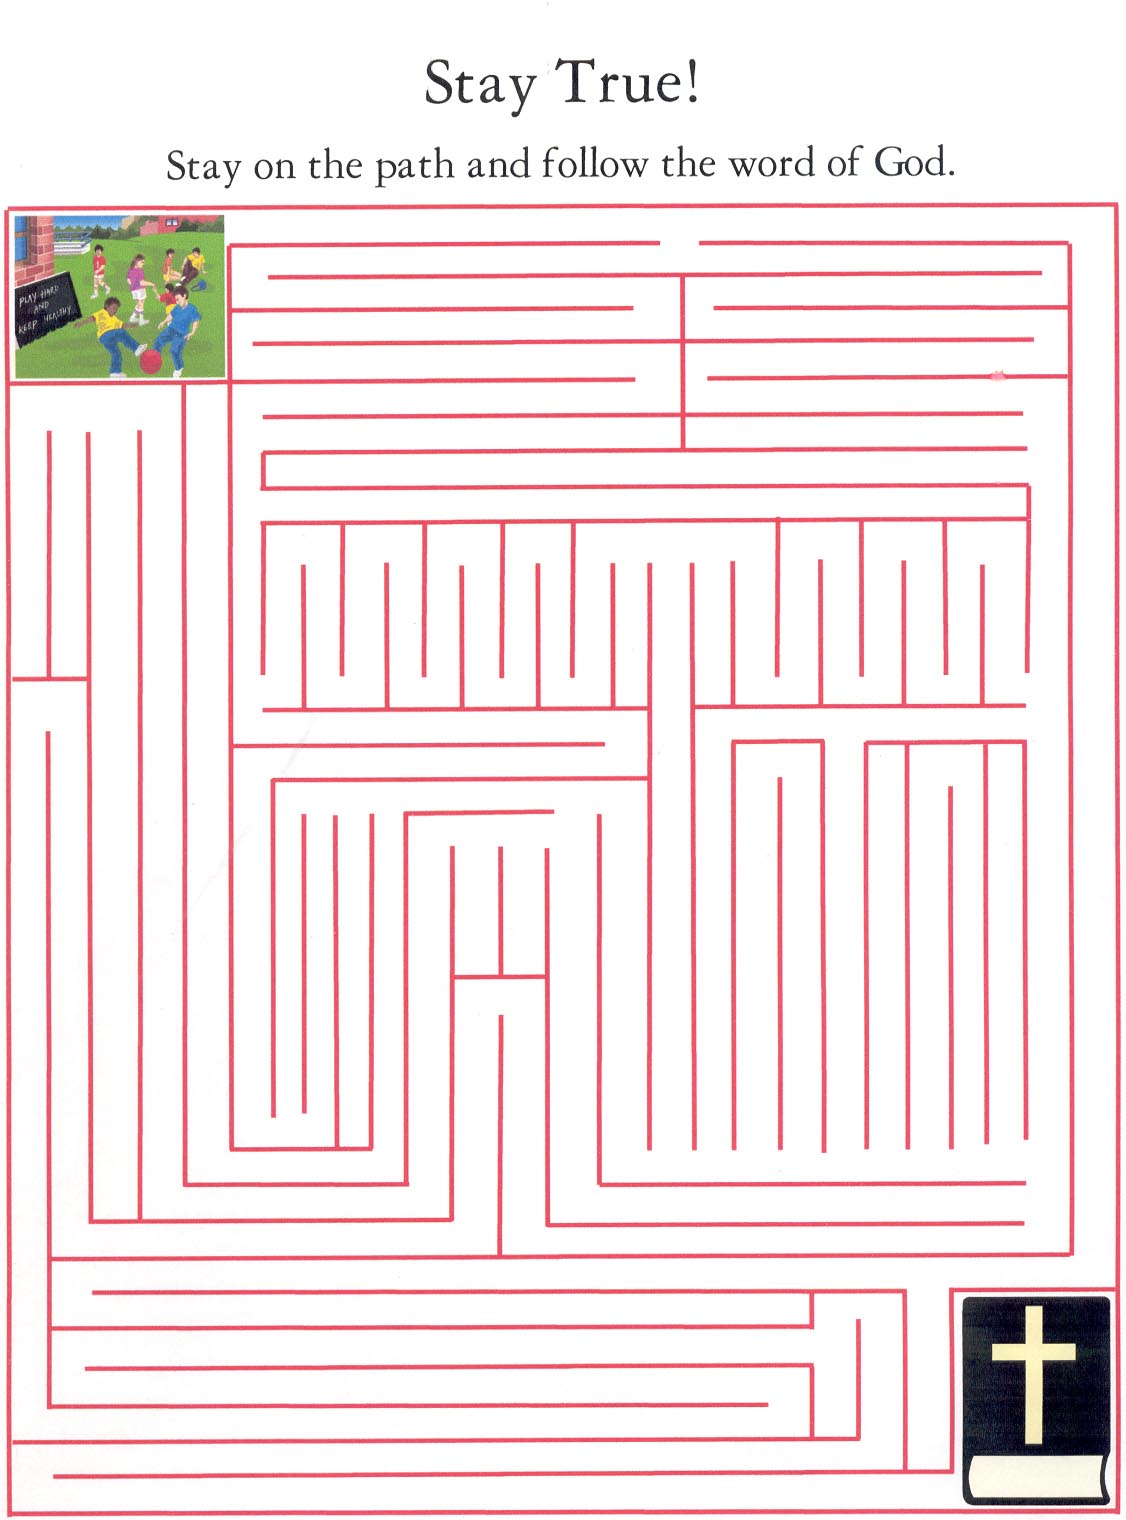 5-best-images-of-printable-bible-mazes-jegs-hp-electric-fuel-pump